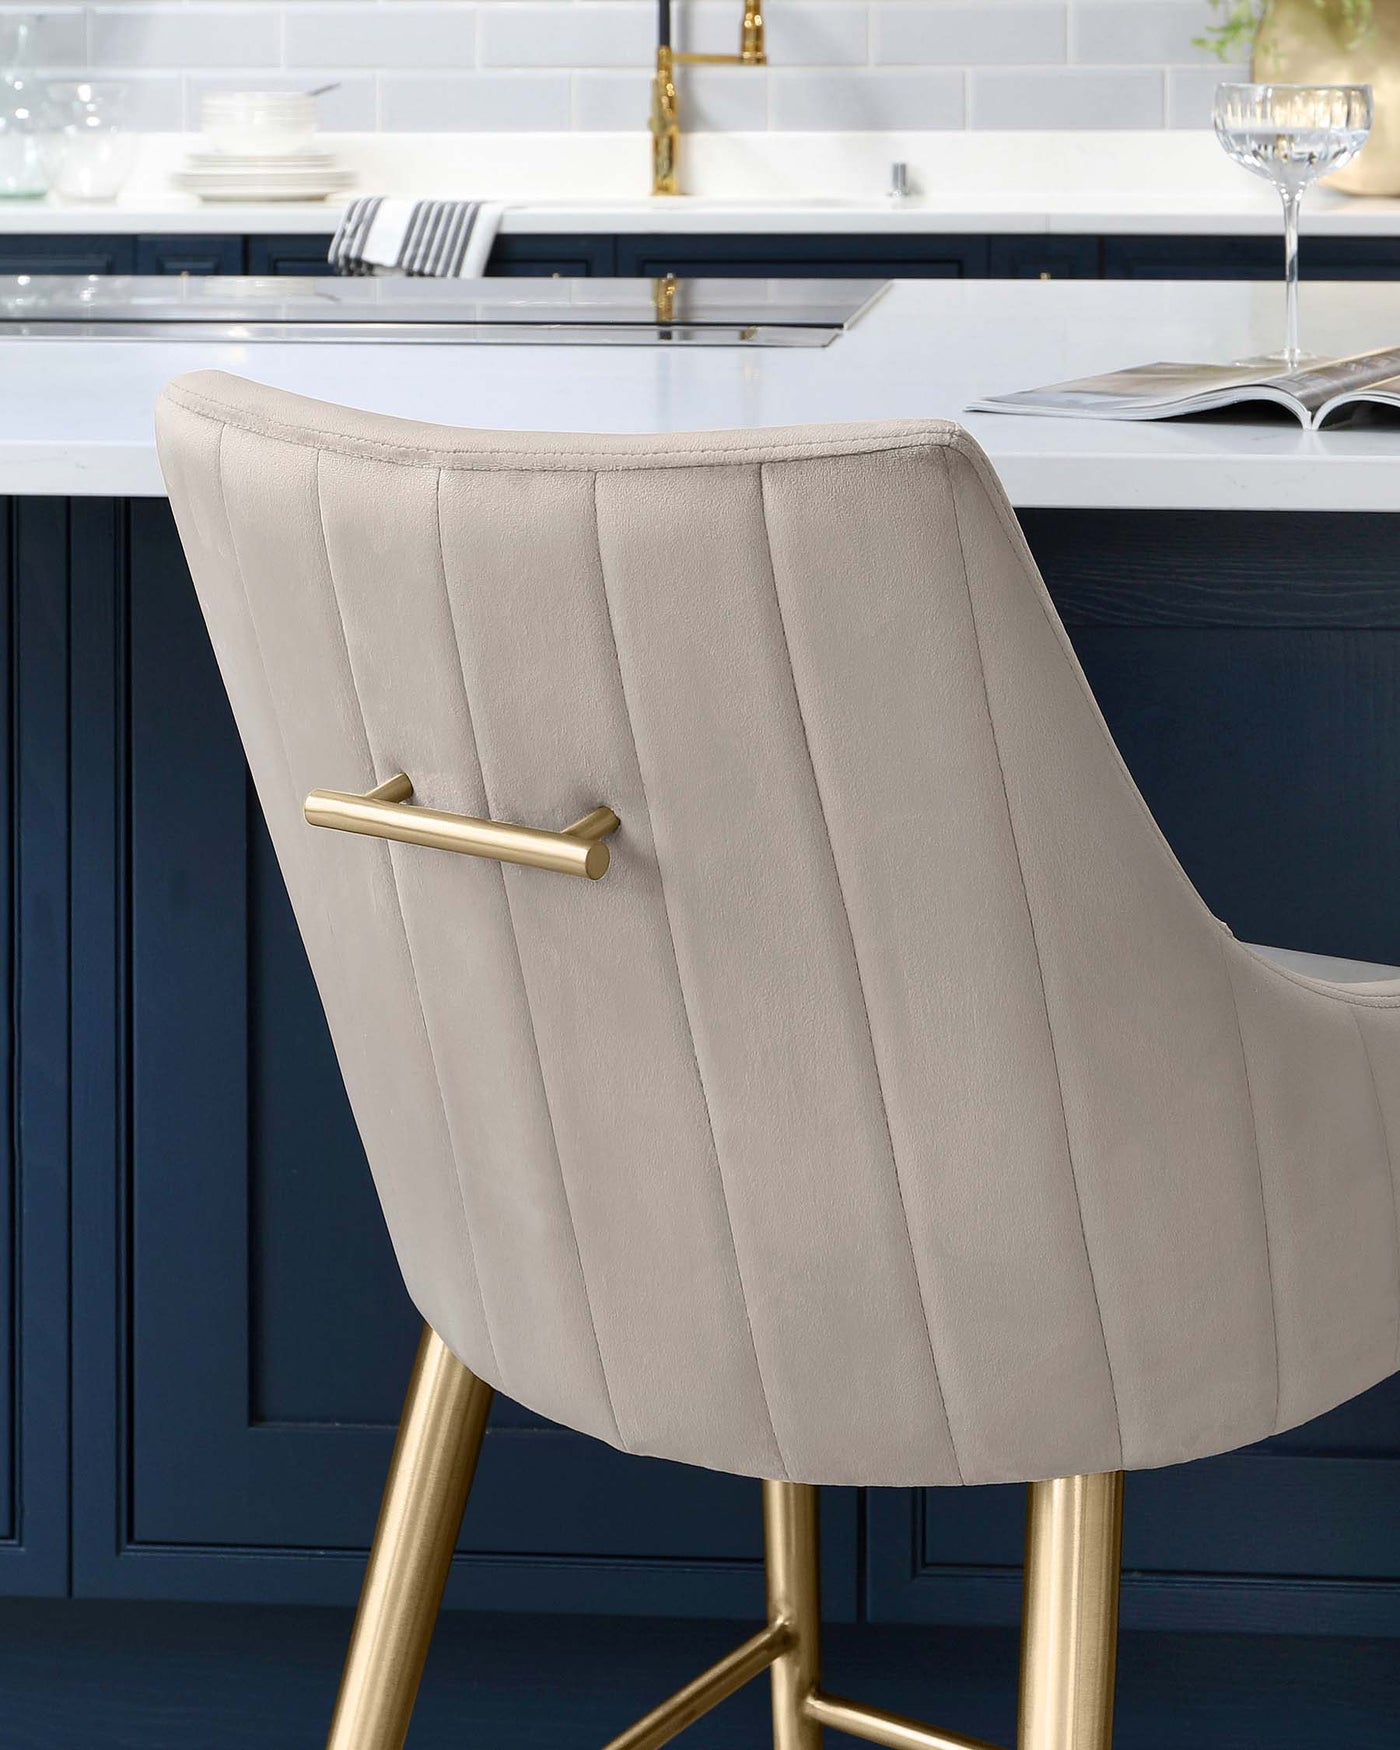 Elegant modern bar stool with beige upholstery and vertical channel stitching. The stool features a curved backrest and a gold-finished metal frame with four sleek legs that intersect at the base, providing sturdy support.